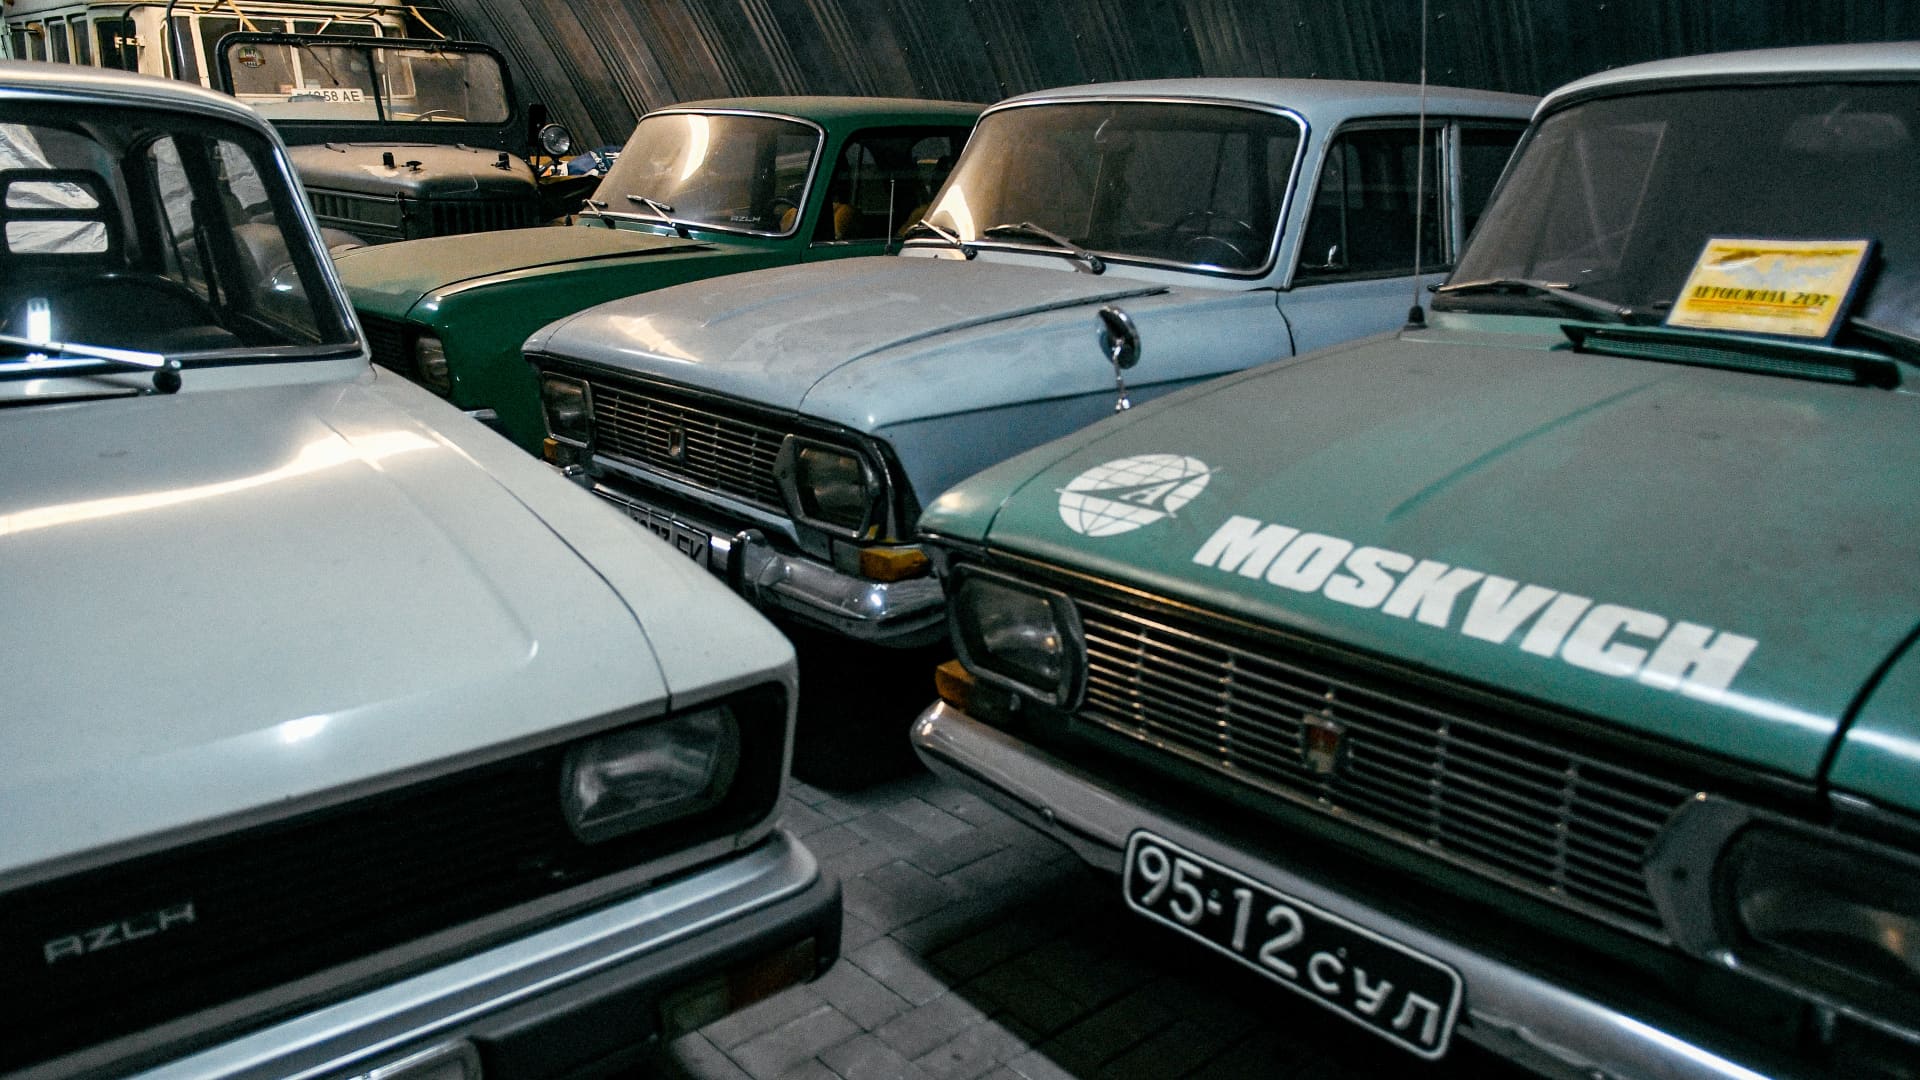 Russia relaunches Soviet-era Moskvich car brand using a former Renault plant